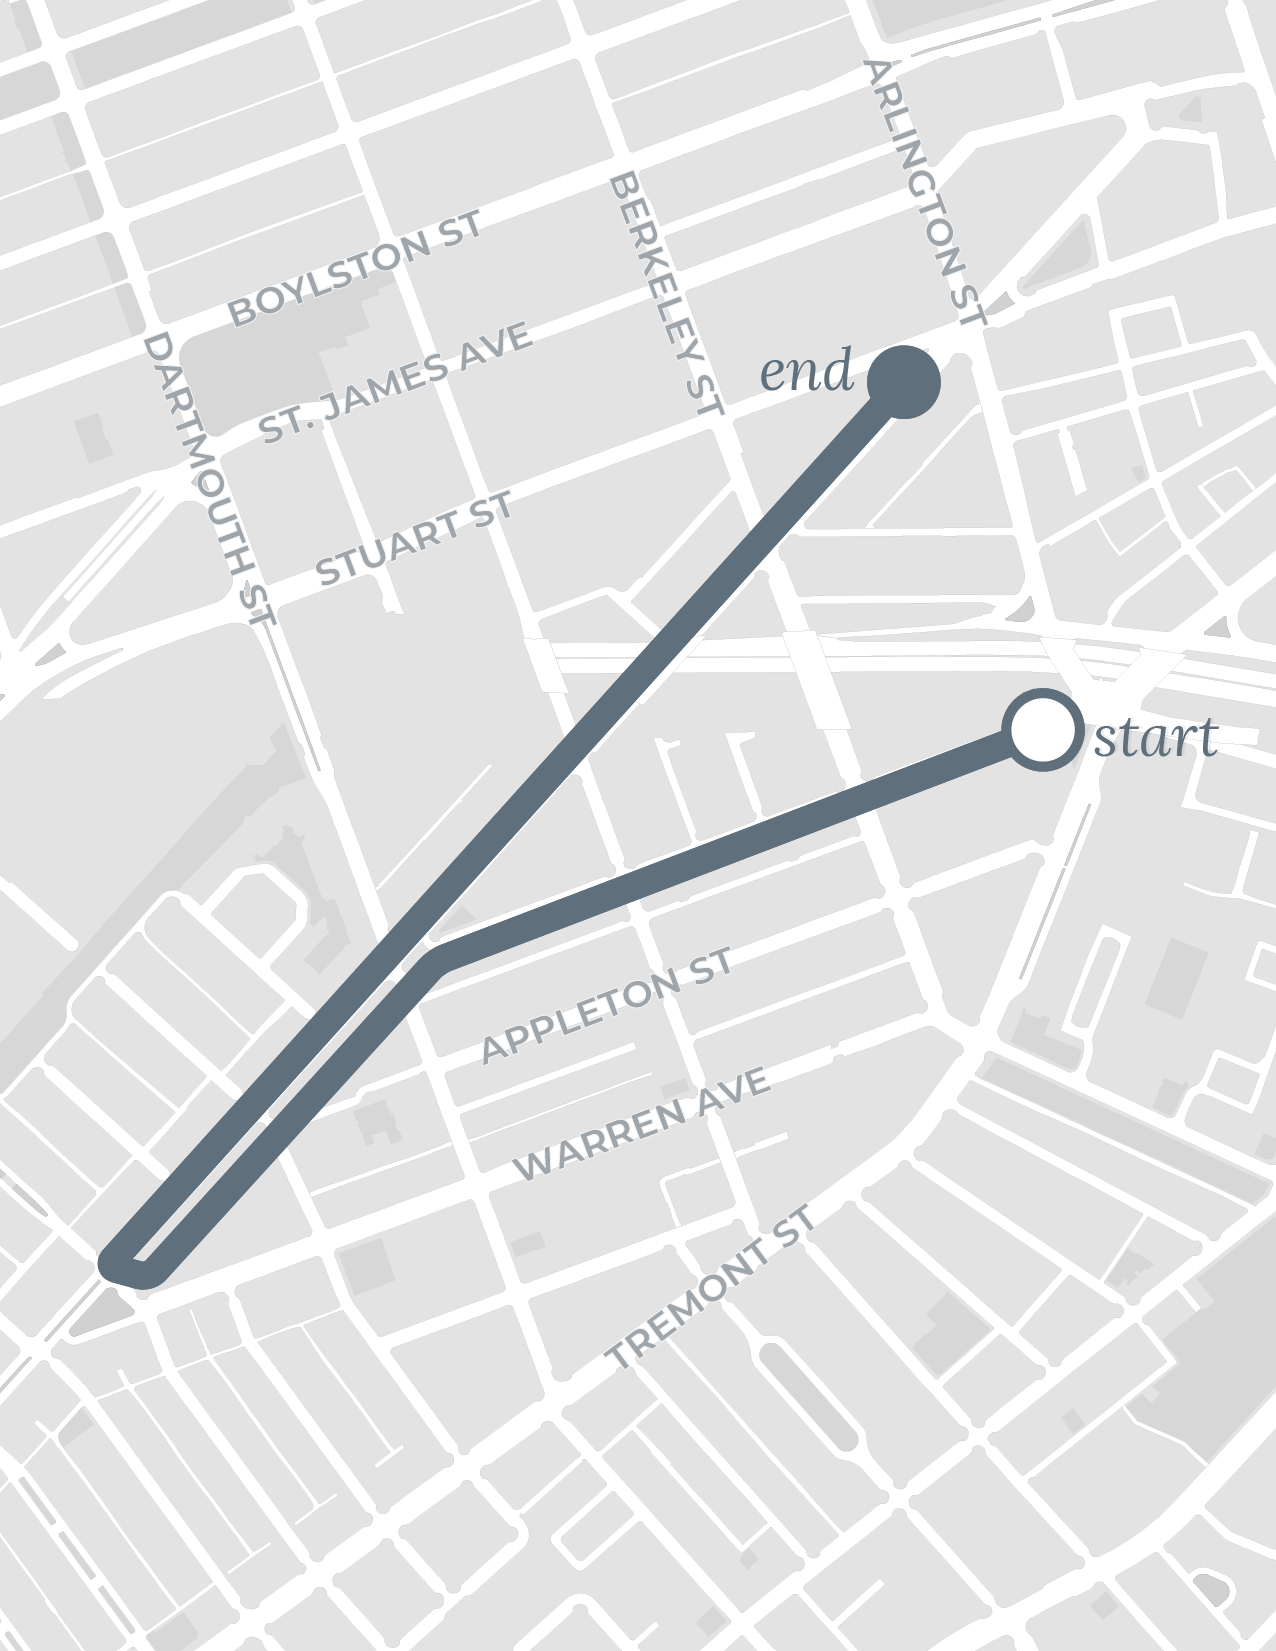 South End walk route map